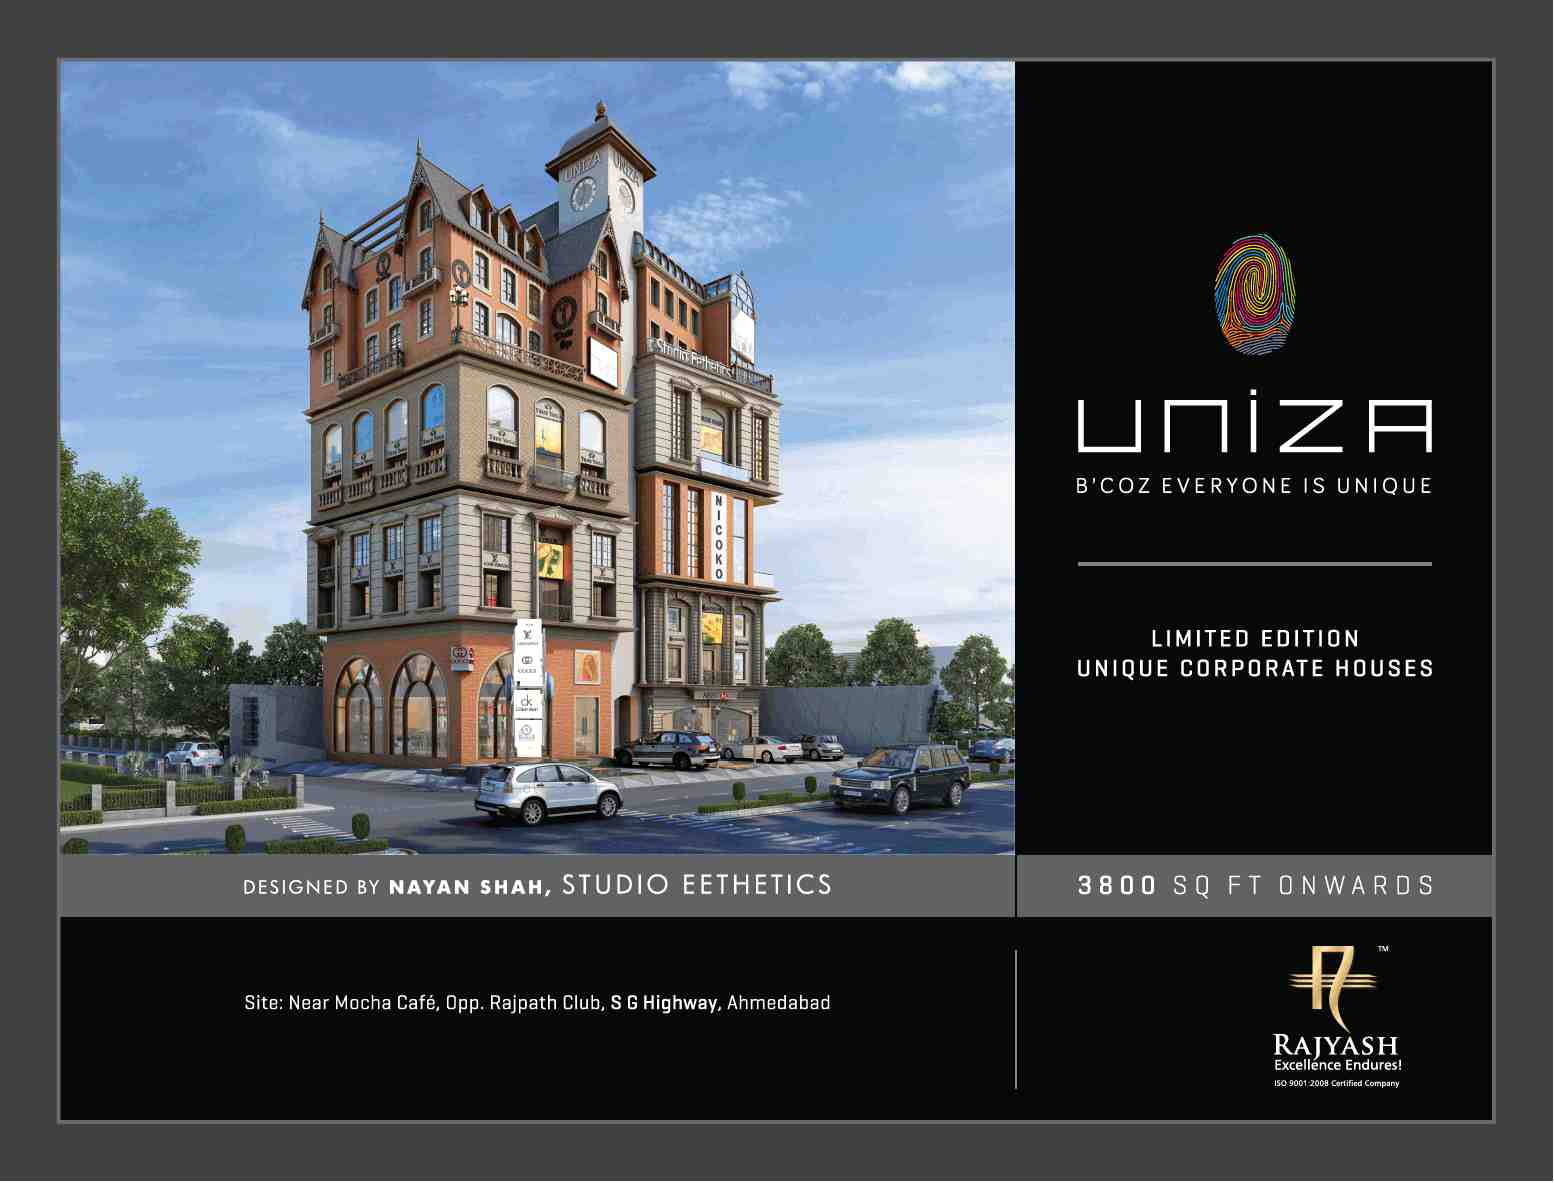 Book limited edition unique corporate houses at Rajyash Uniza in Ahmedabad